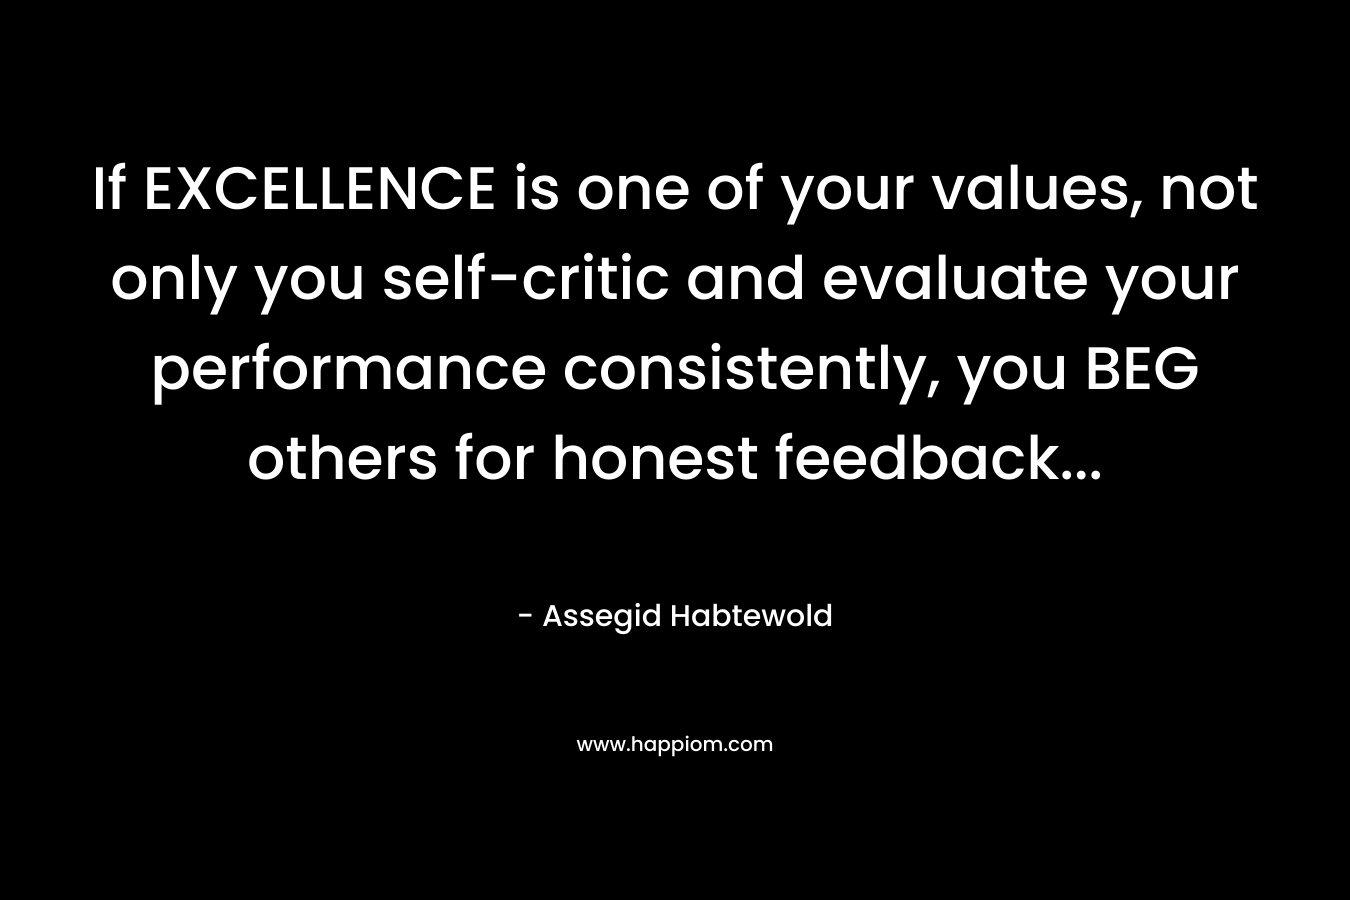 If EXCELLENCE is one of your values, not only you self-critic and evaluate your performance consistently, you BEG others for honest feedback...